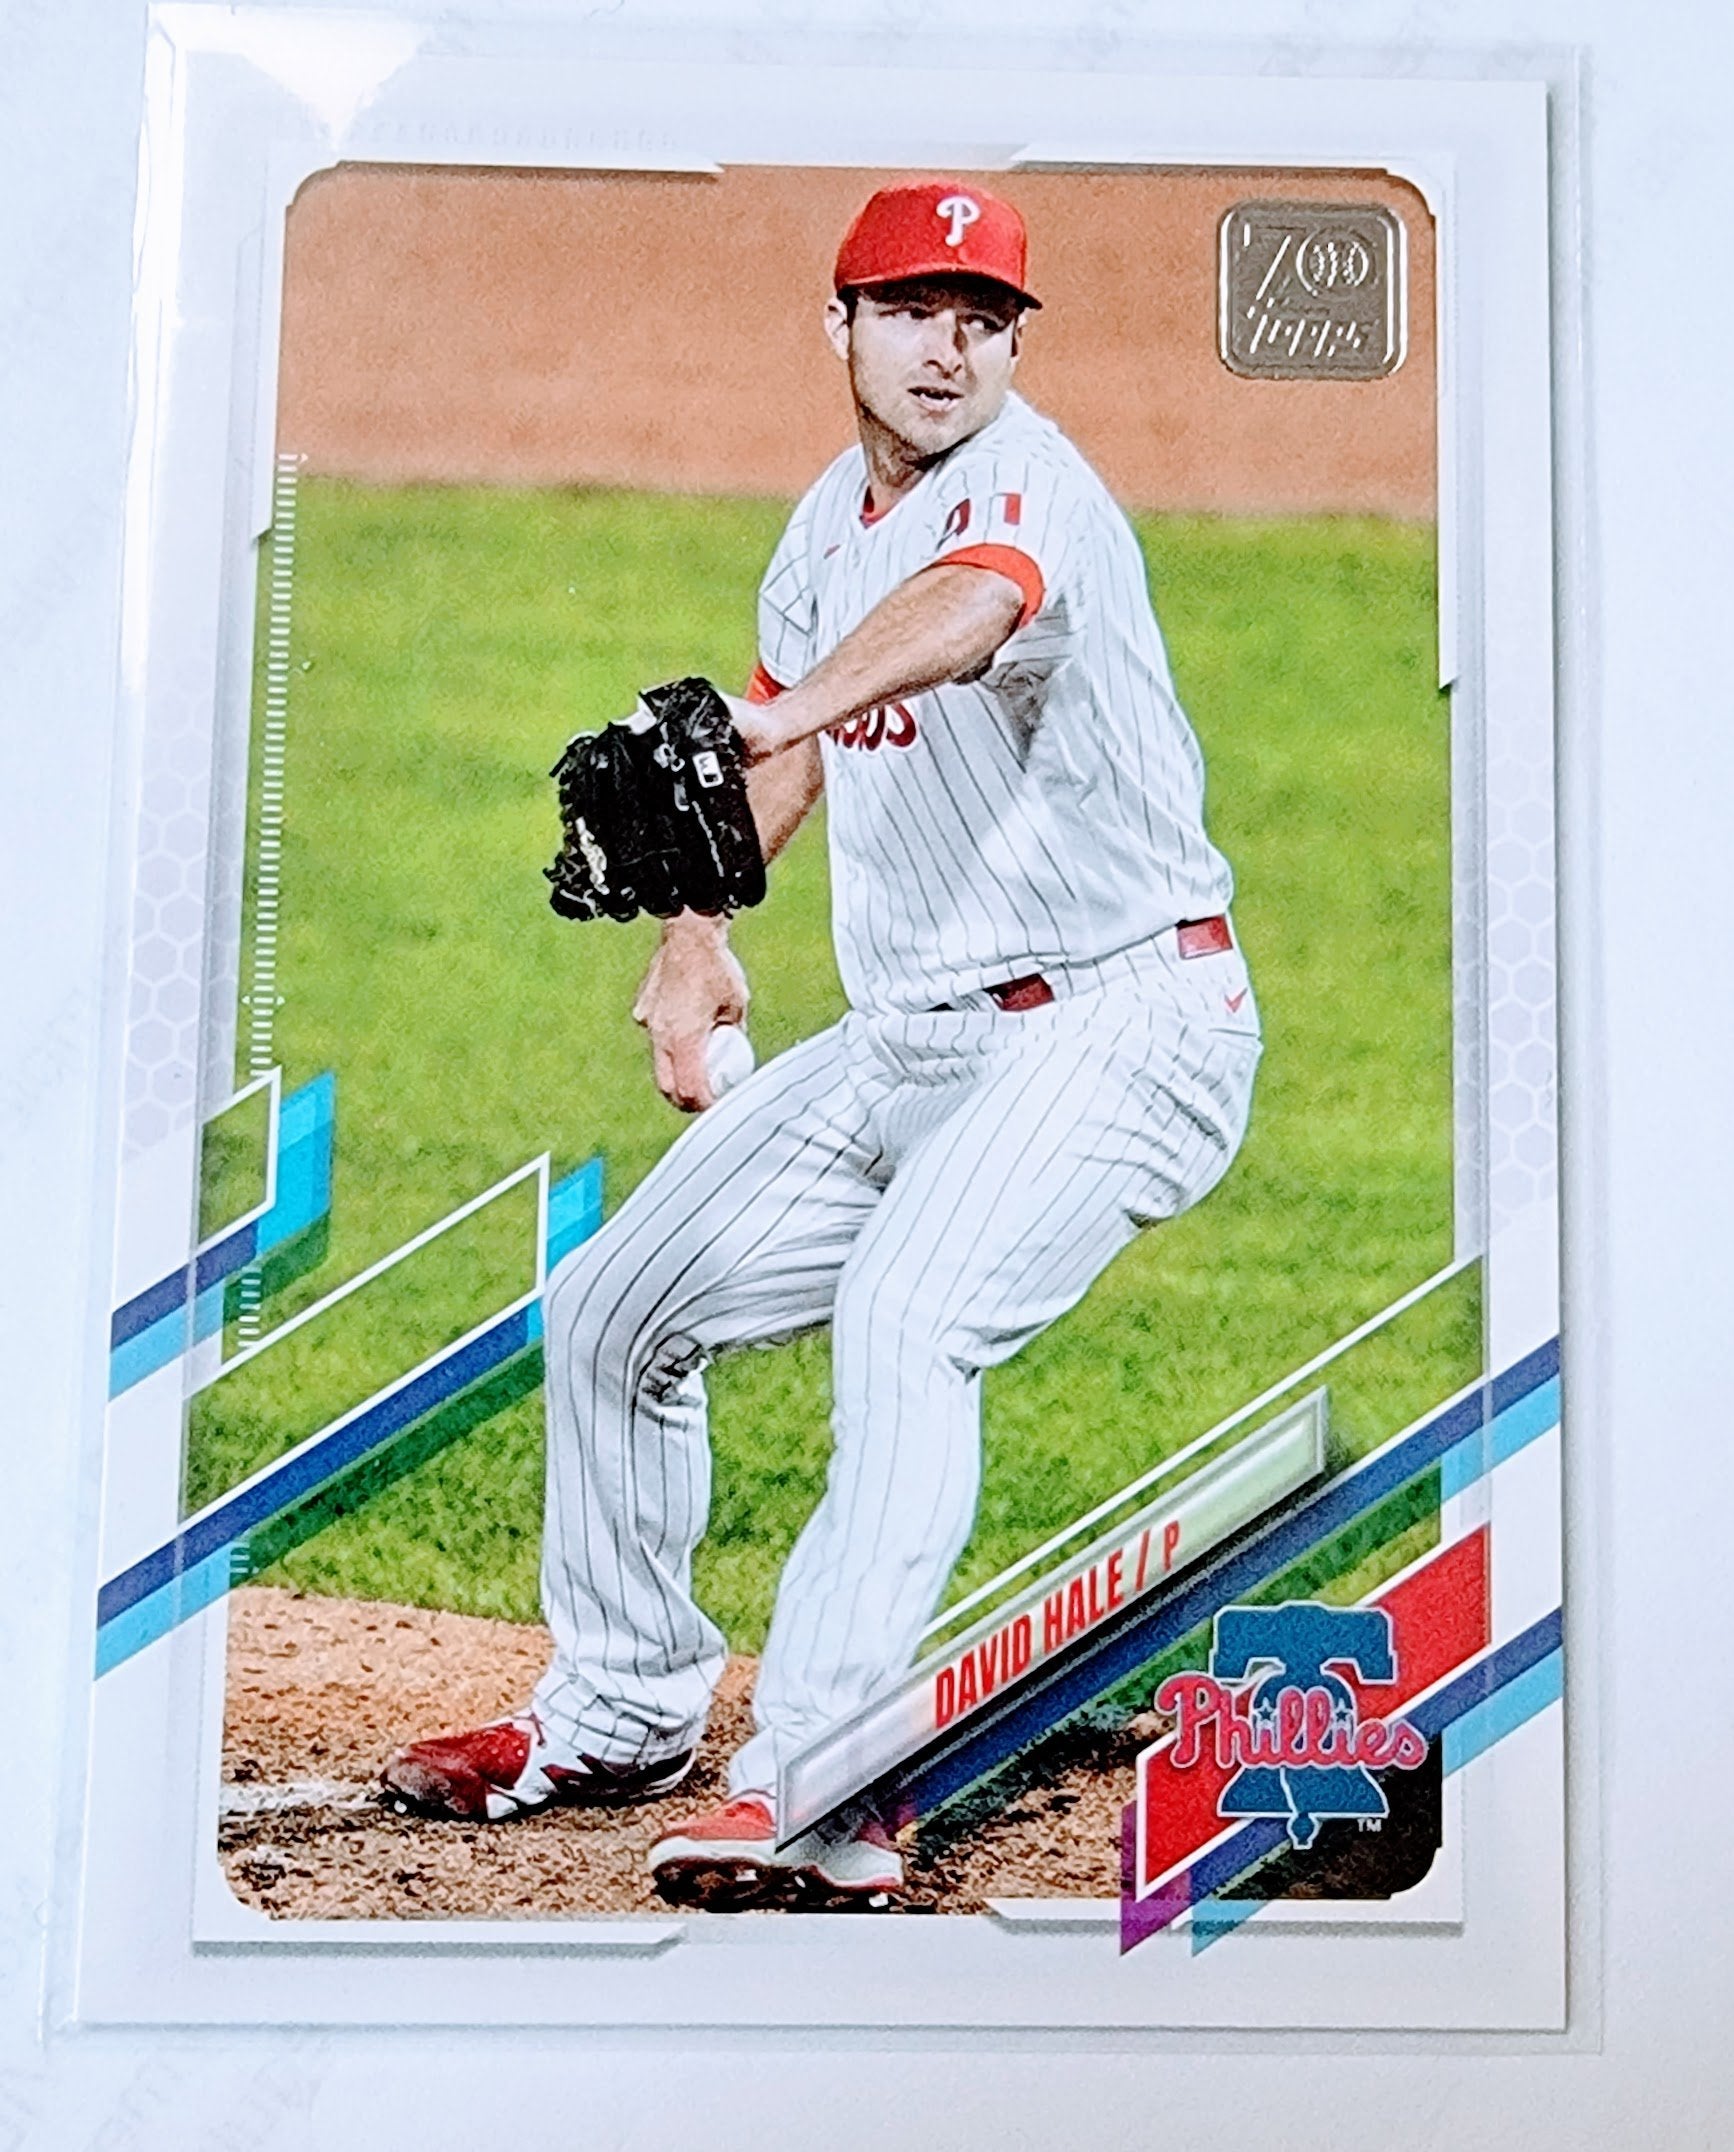 2021 Topps Update David Hale Baseball Trading Card SMCB1 simple Xclusive Collectibles   